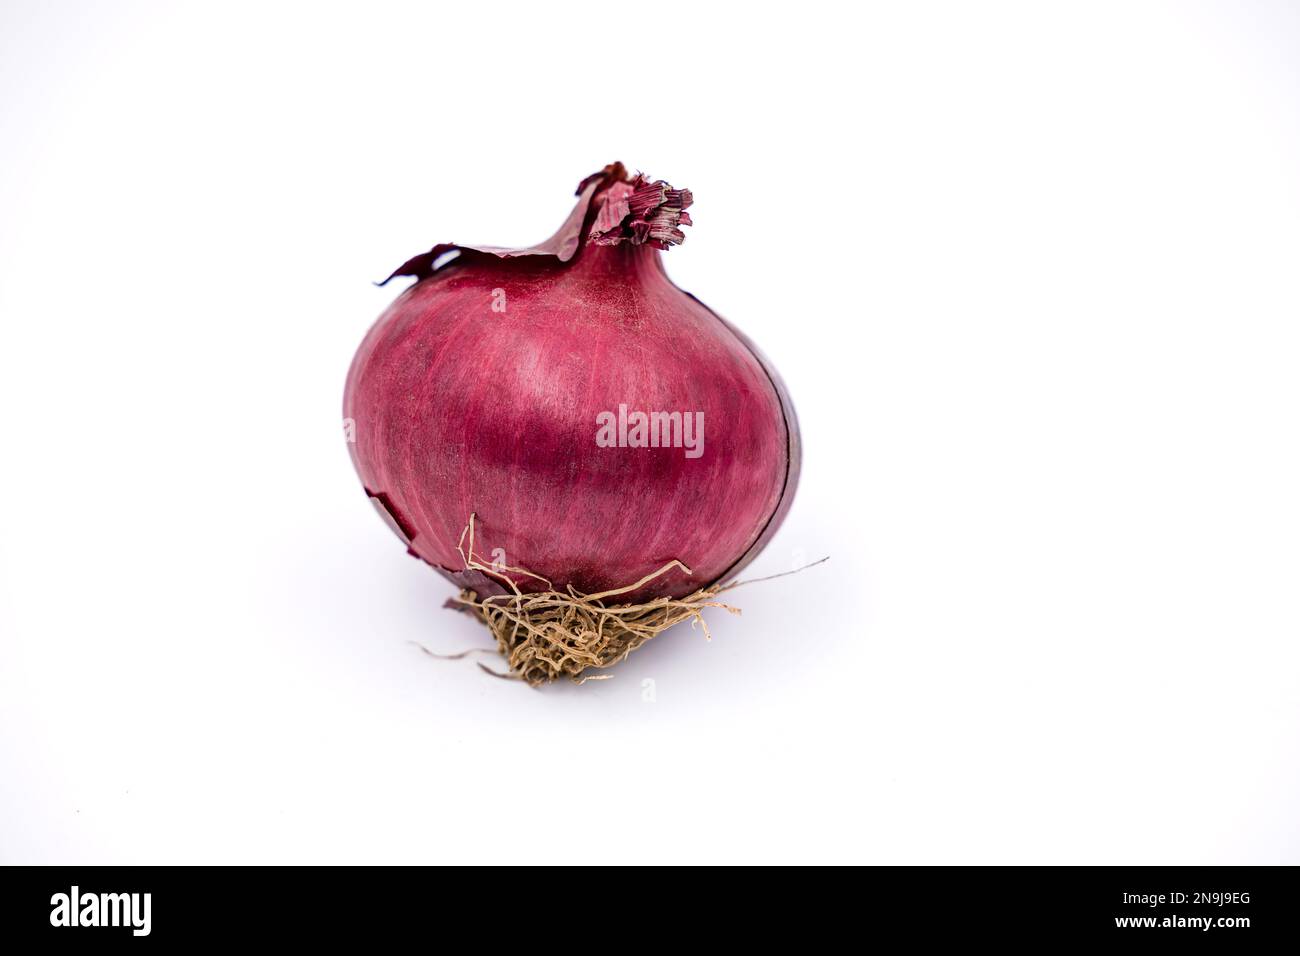 A red onion grown organically as a healthy food isolated with focus stacking against a white background in the studio Stock Photo